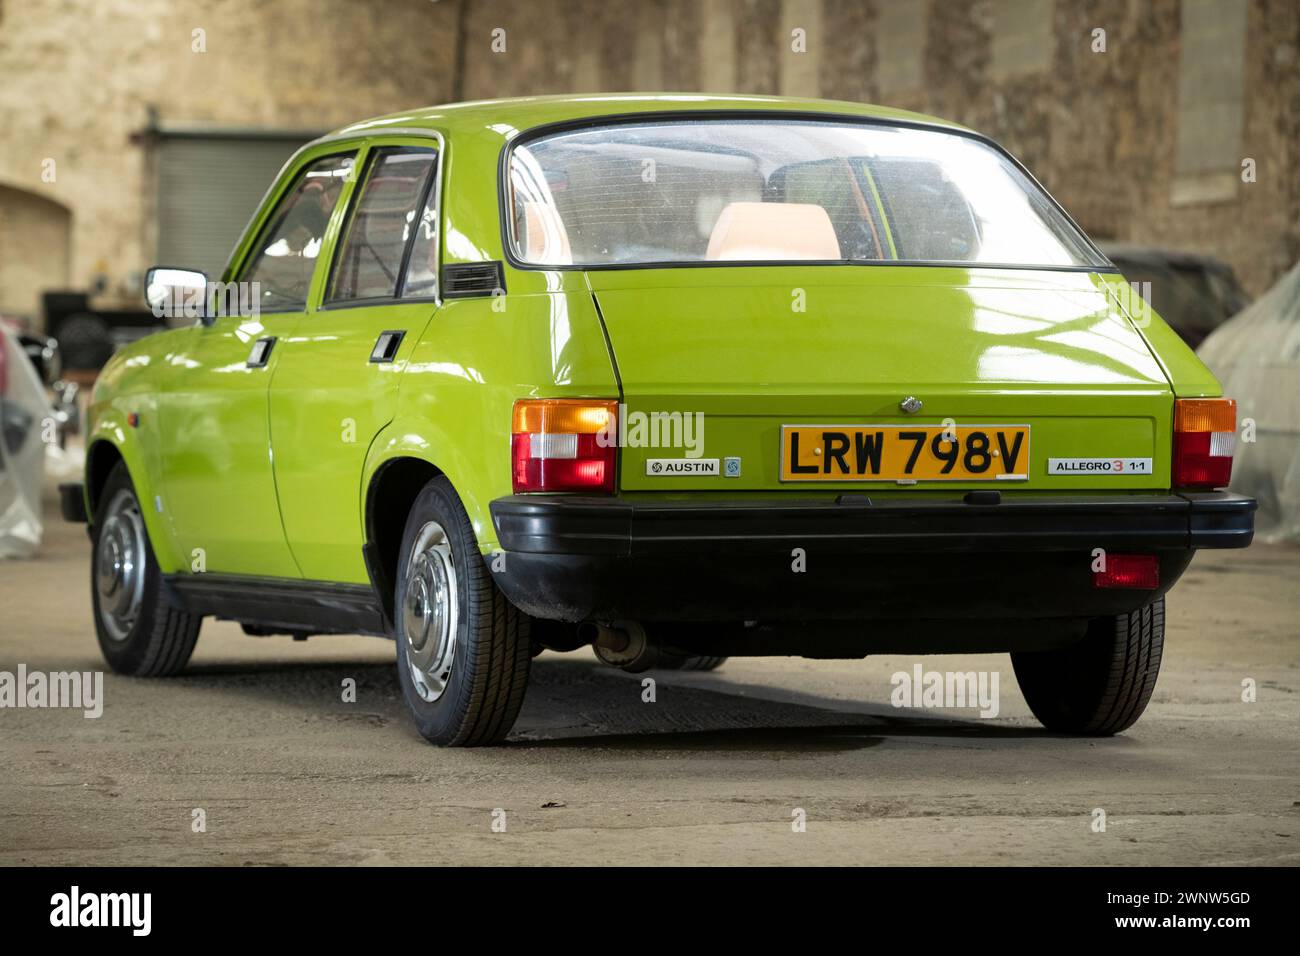 21/04/21  1980 Austin Allegro.  A collection of 130 British cars, in almost as many paint shades, was unveiled at Great British Car Journey, Ambergate Stock Photo